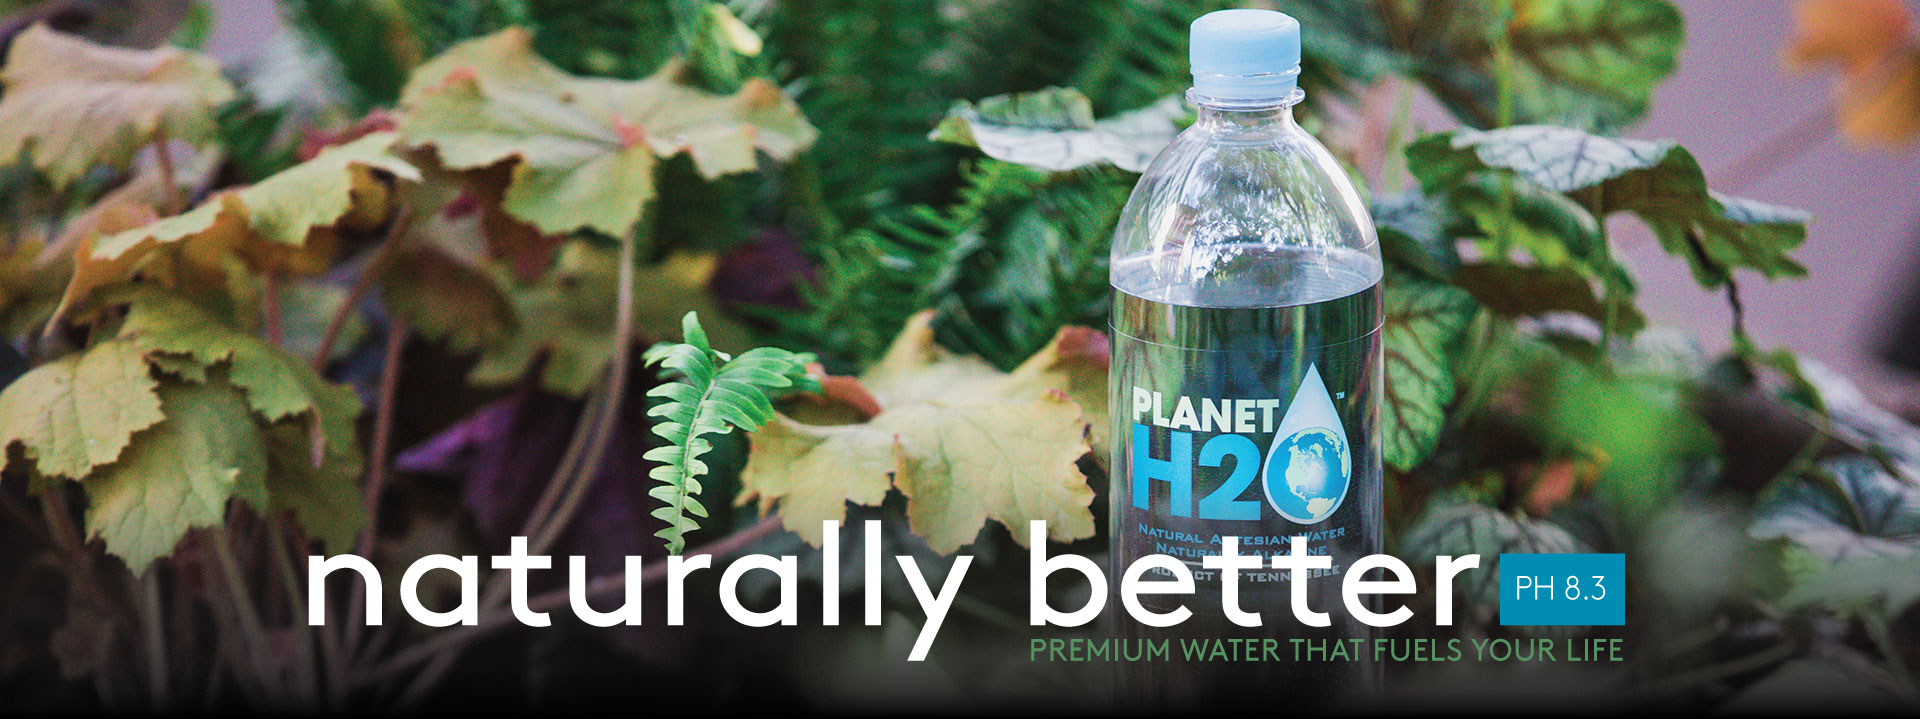 Premium Water that Fuels your life PH8.3